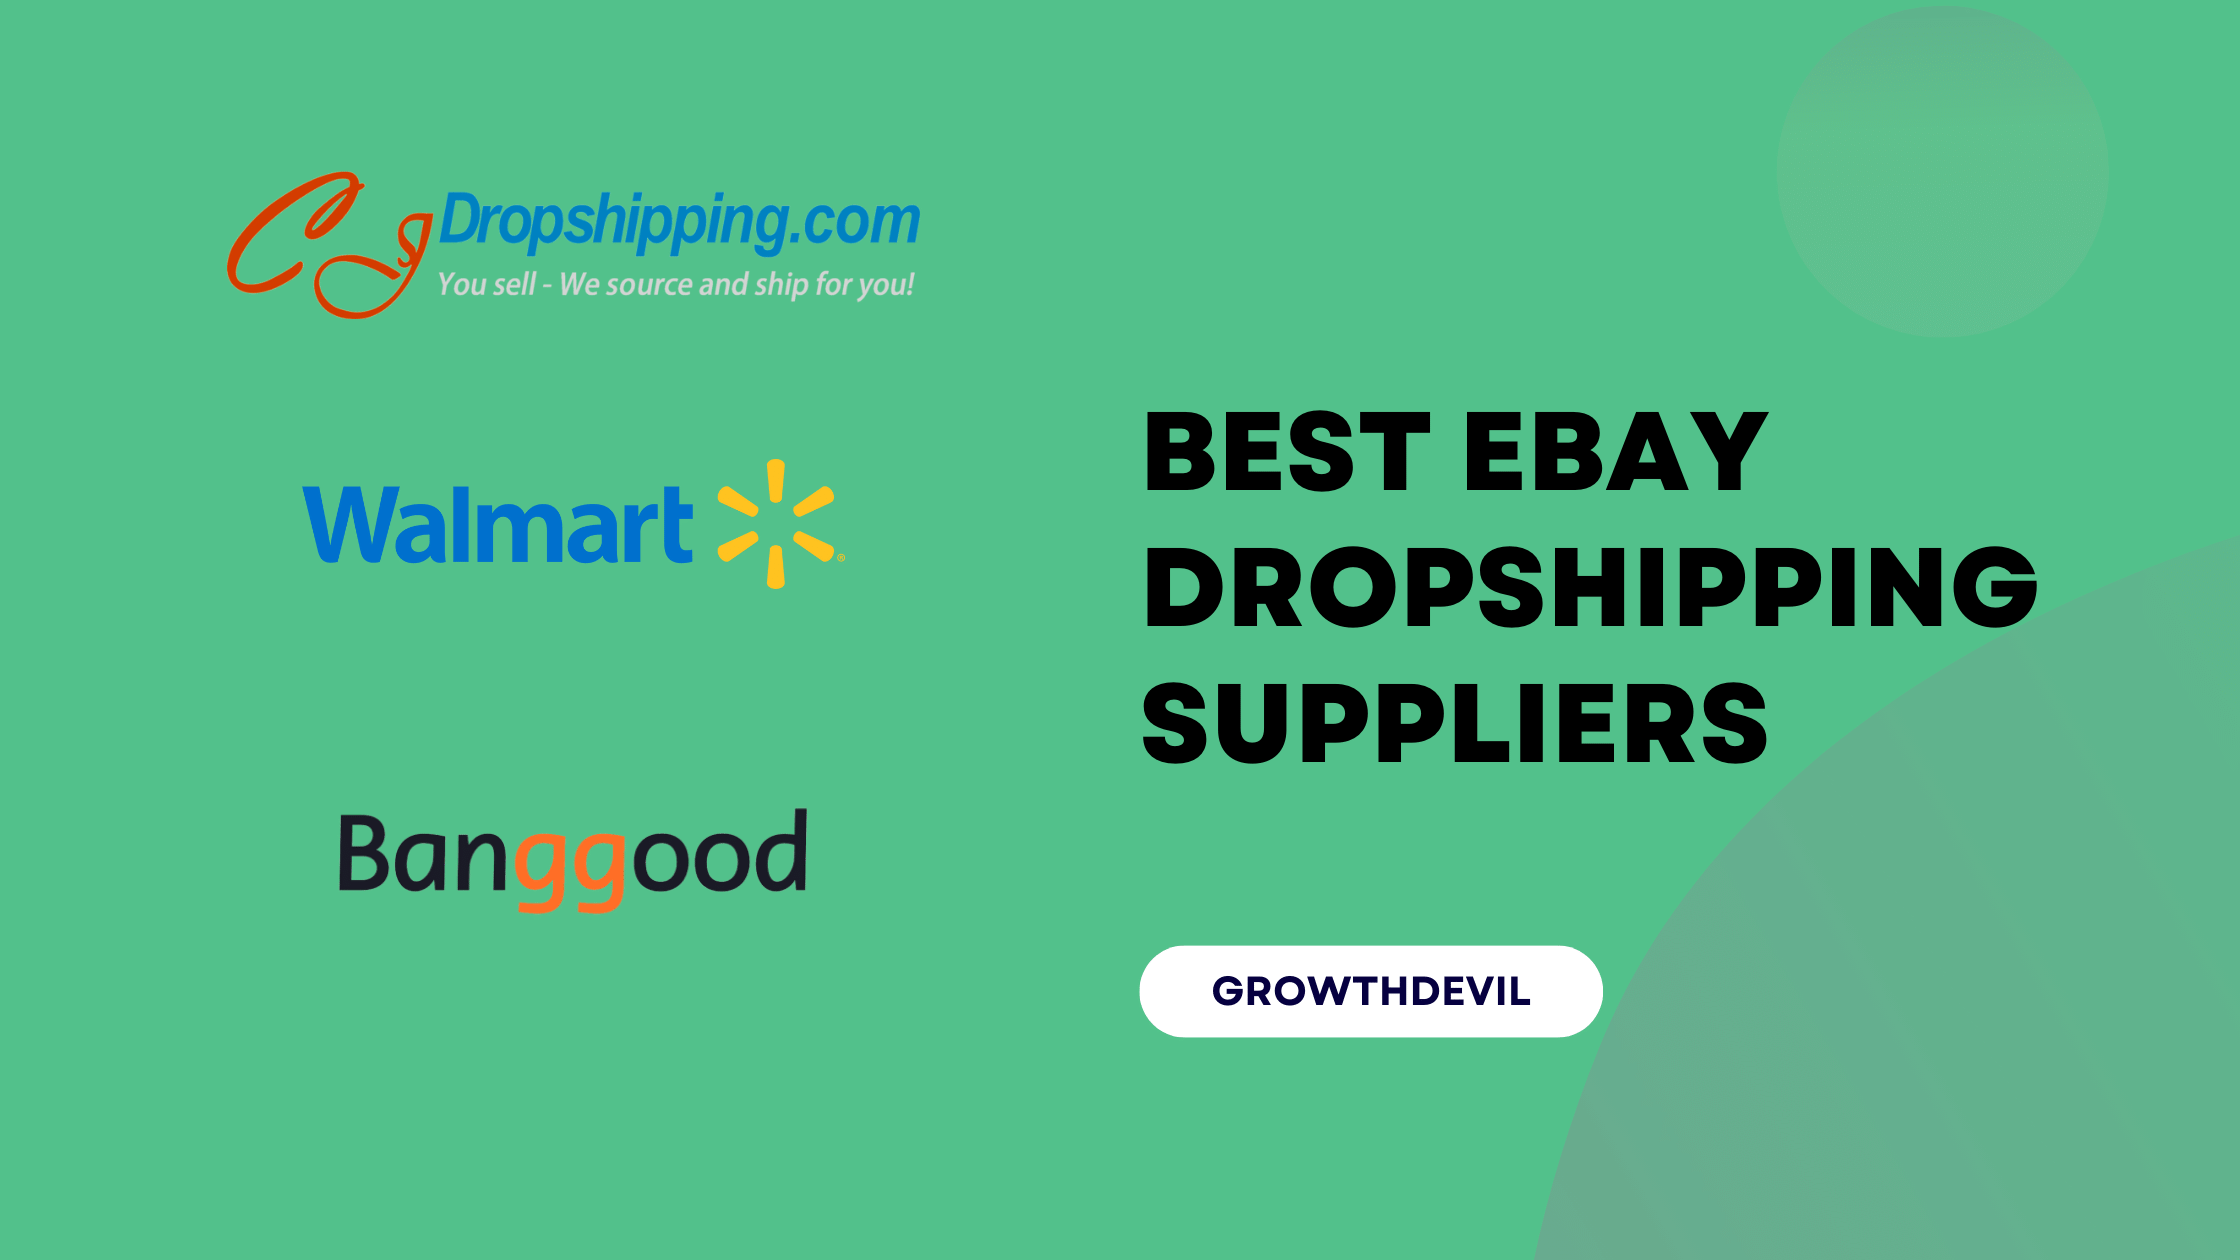 Best eBay Dropshipping Suppliers - GrowthDevil